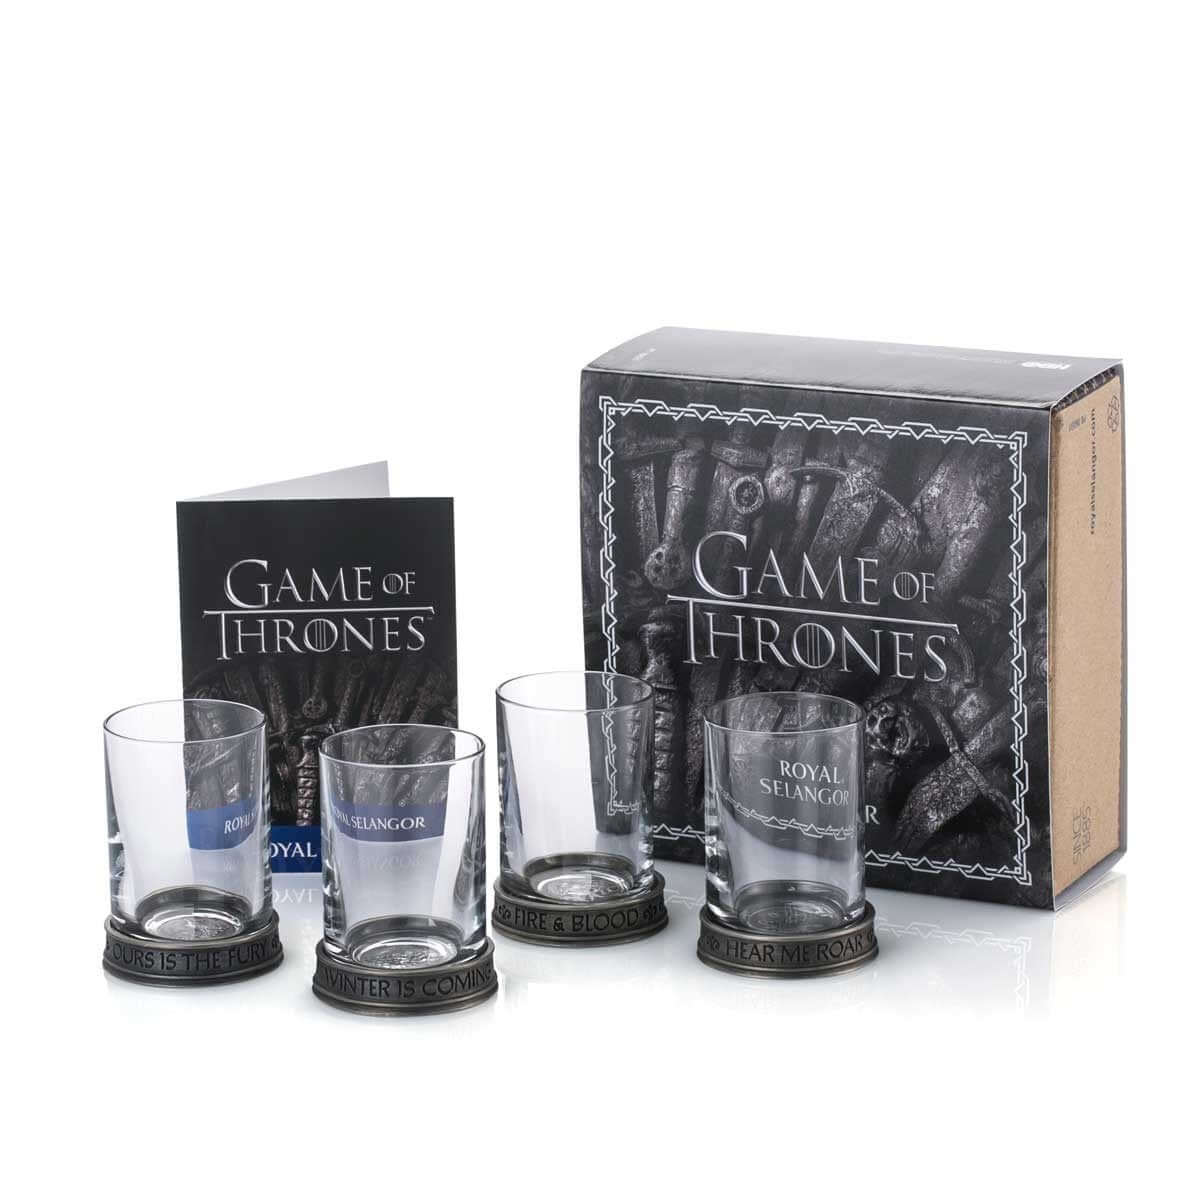 House Sigils Shot Glass Quartet - Game of Thrones Collectible Gift